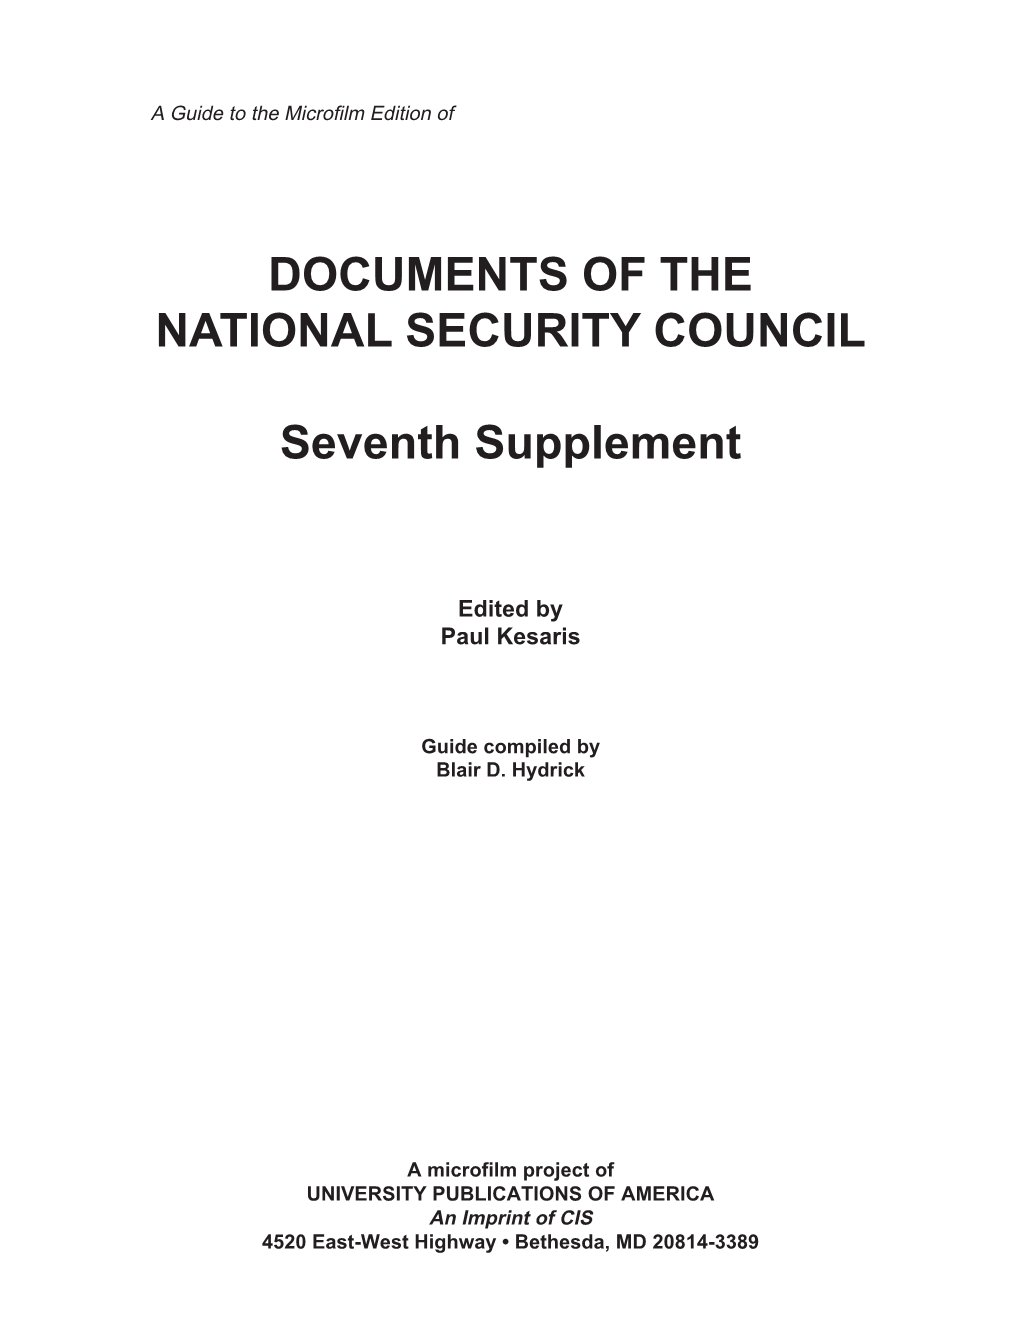 DOCUMENTS of the NATIONAL SECURITY COUNCIL Seventh